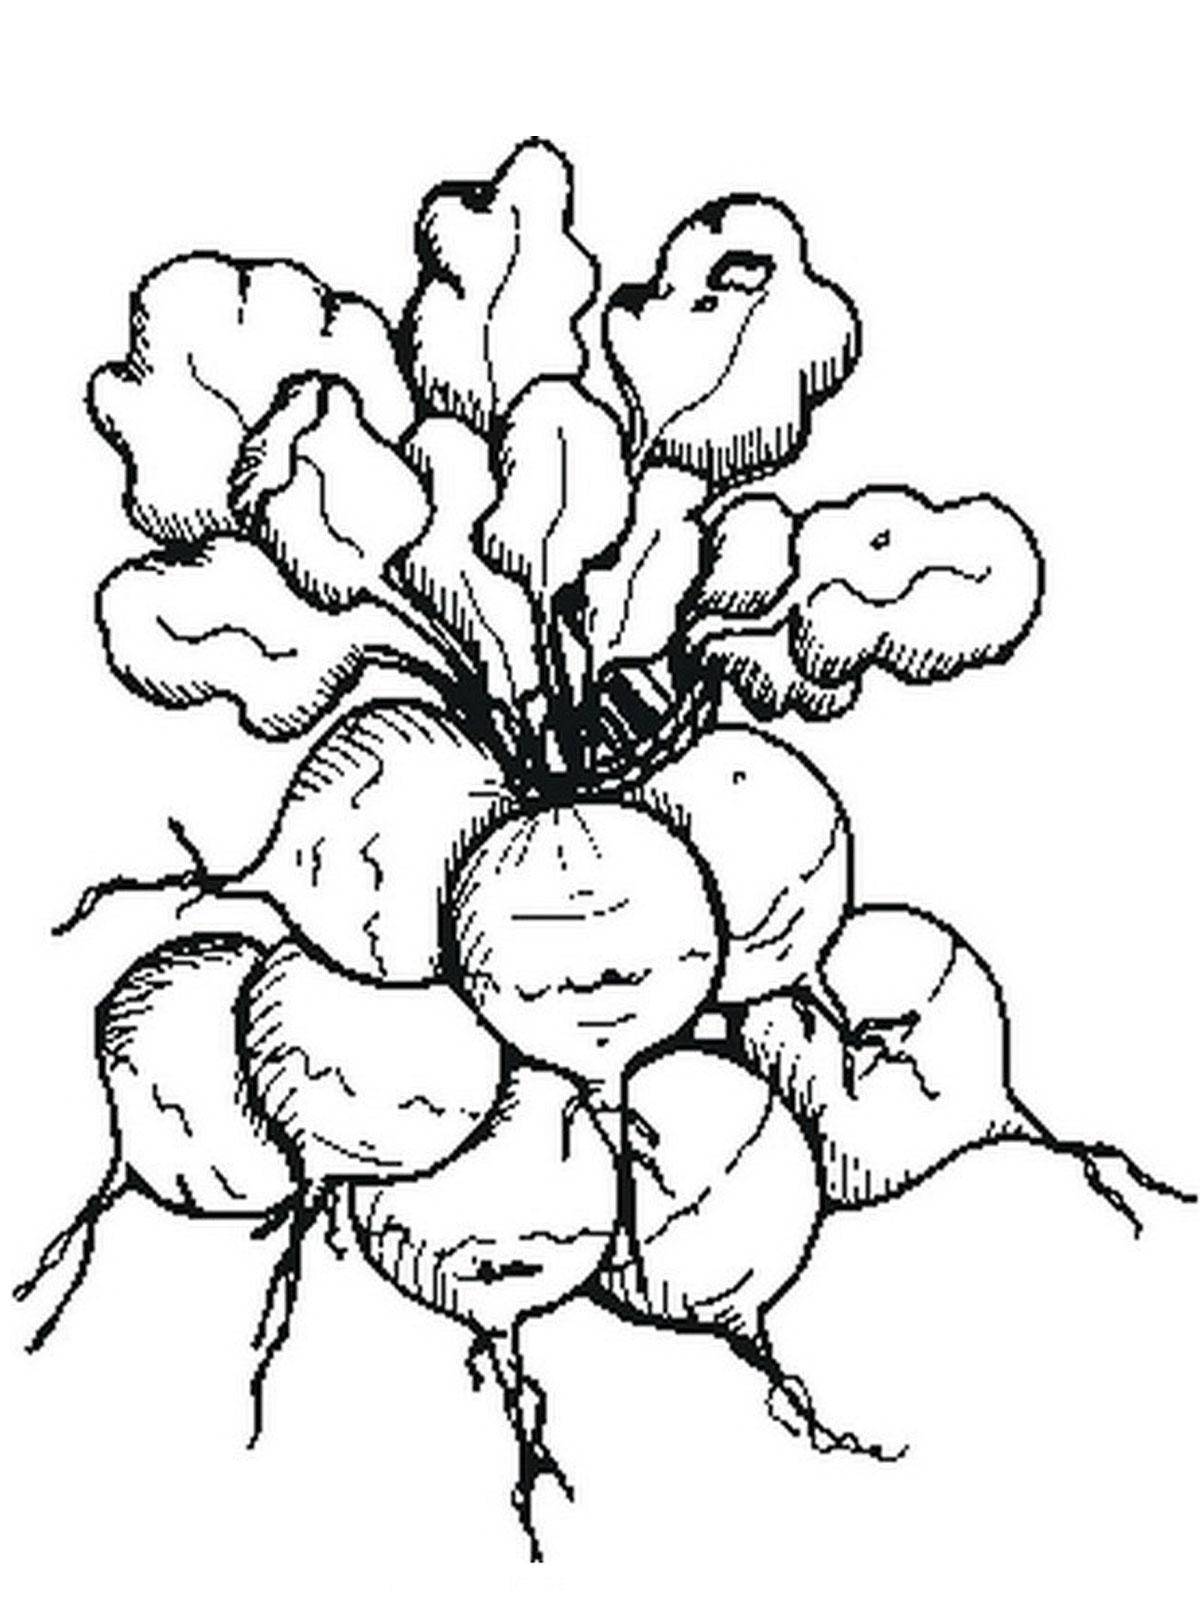 Coloring Turnips. Category vegetables. Tags:  turnips.